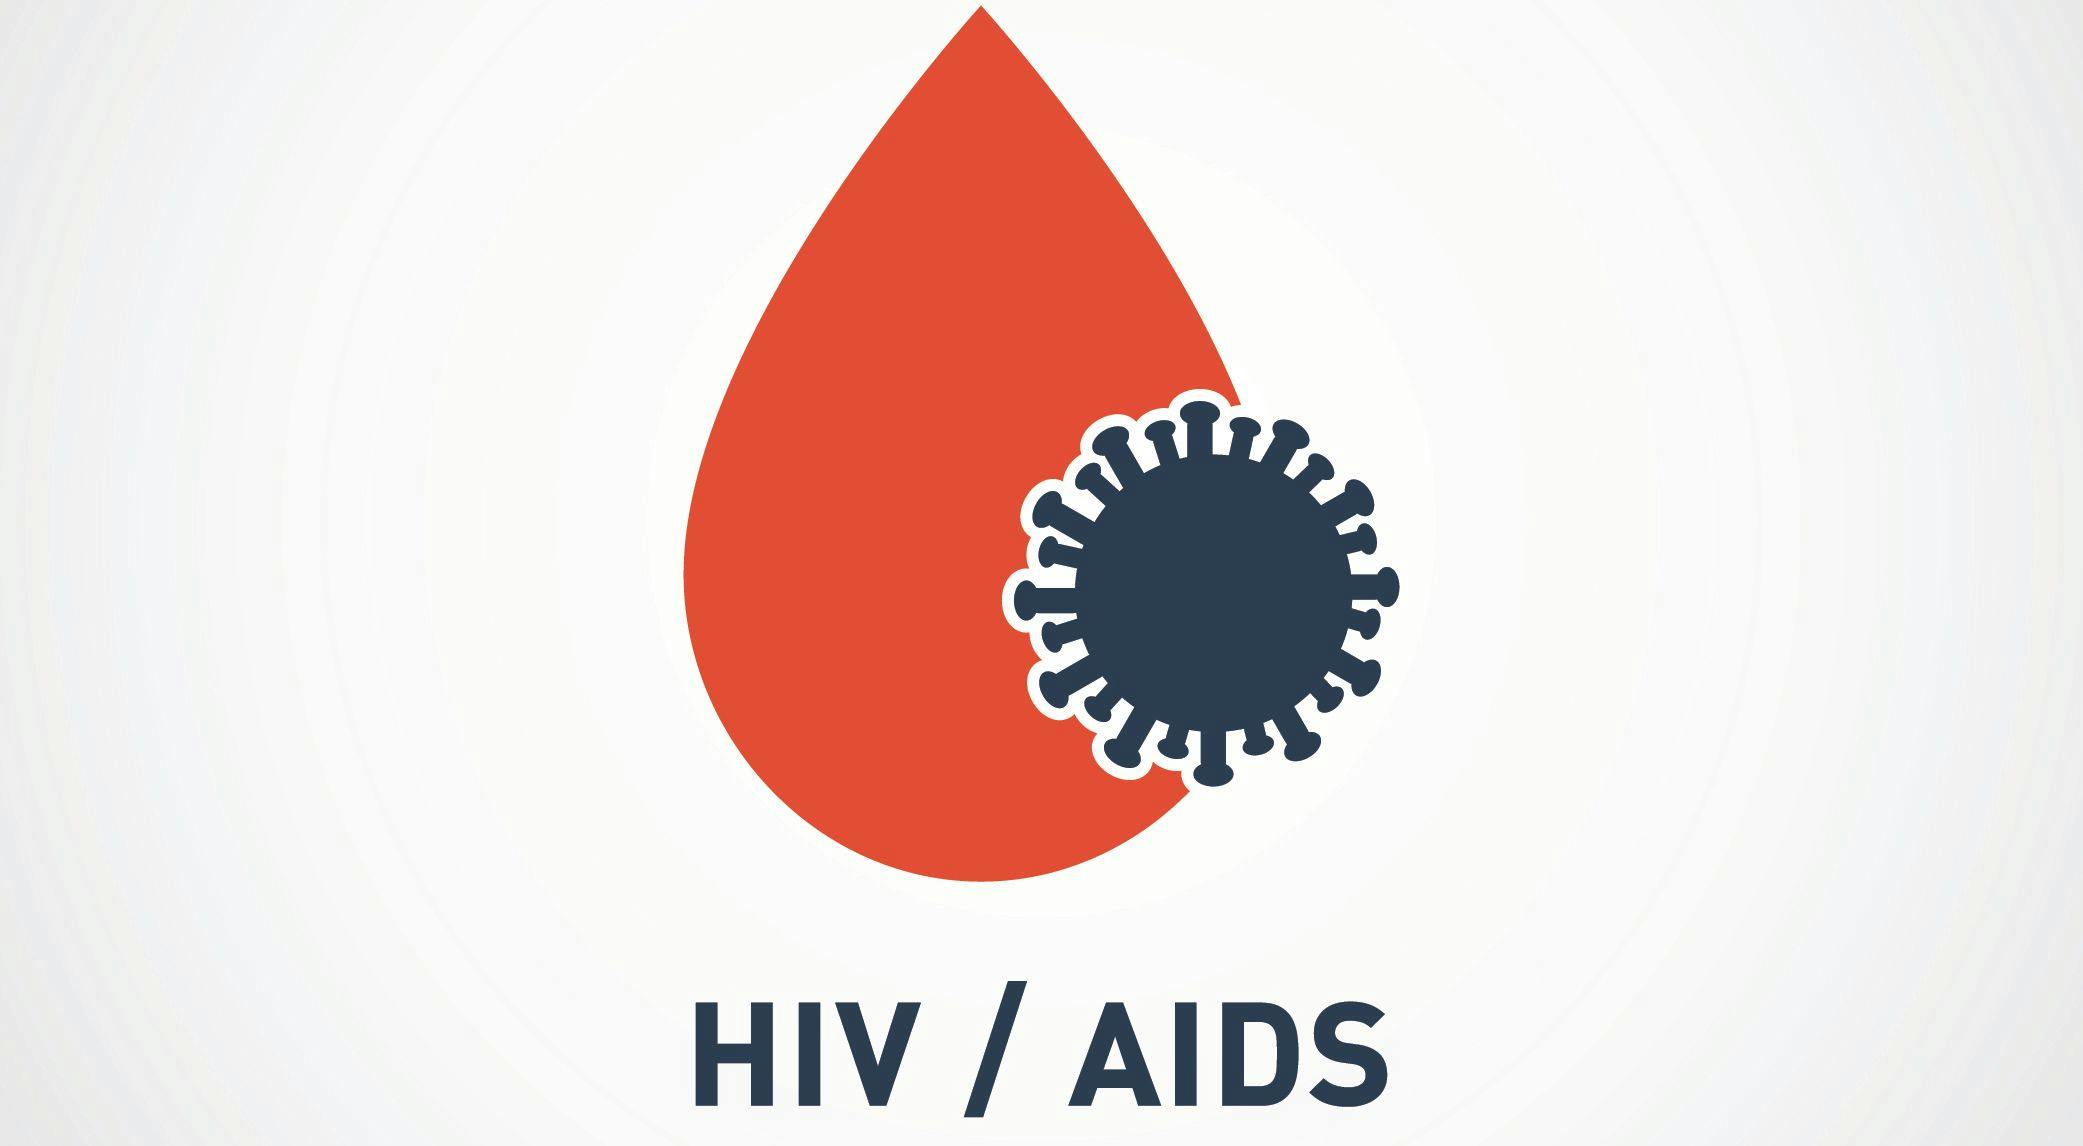 Patients With HIV May Be Good Candidates for Cancer Clinical Trials